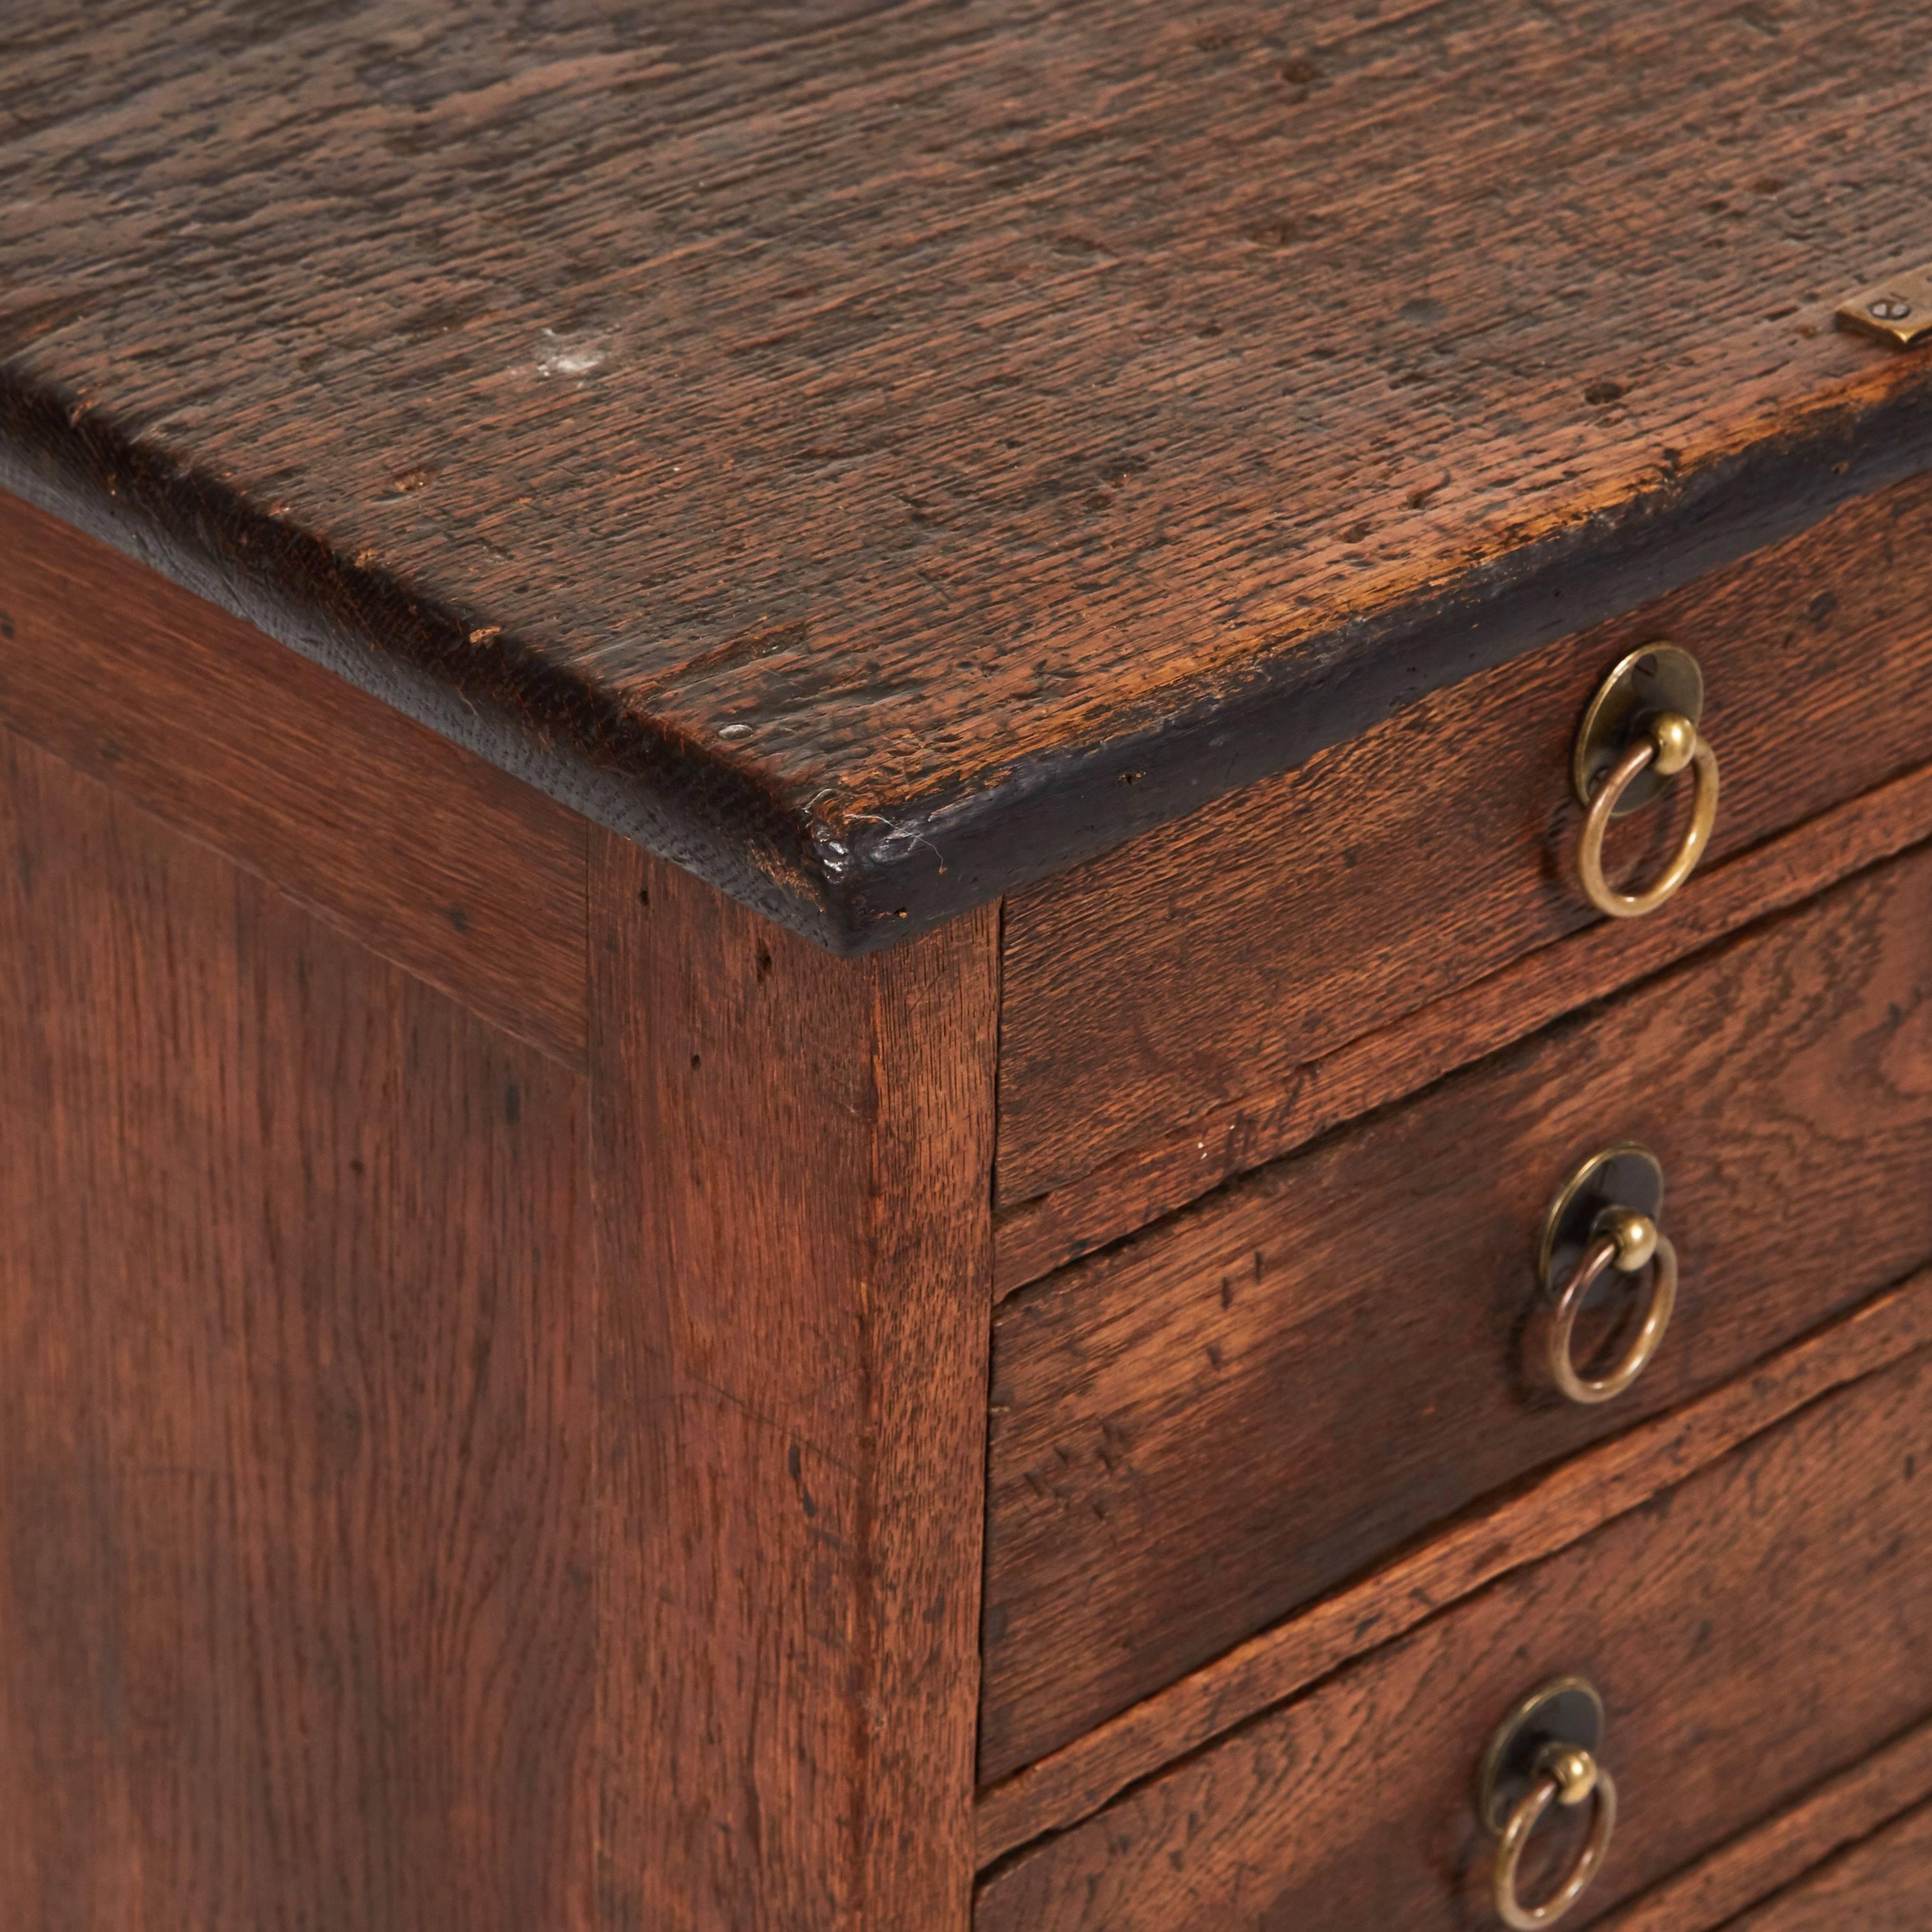 1880s French tailor's wood chest of drawers with brass handles and solid wood top. 